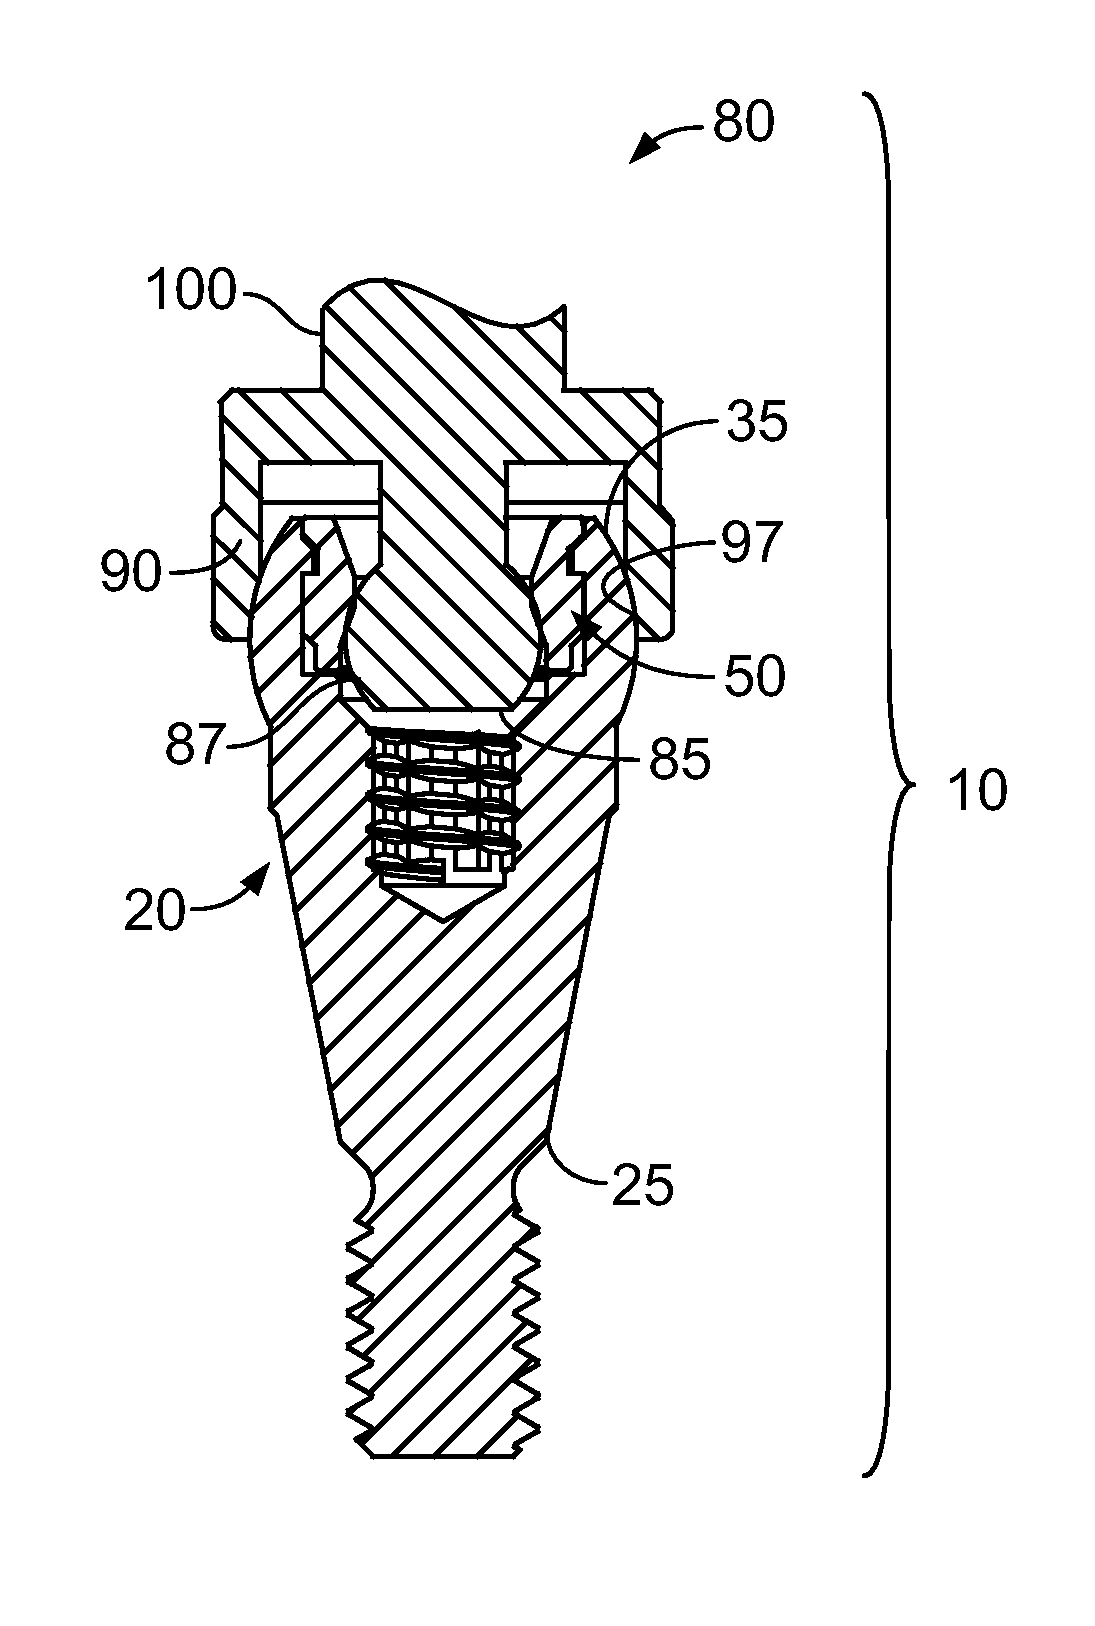 Fixed detachable dental attachment device, assembly and methods of using the same